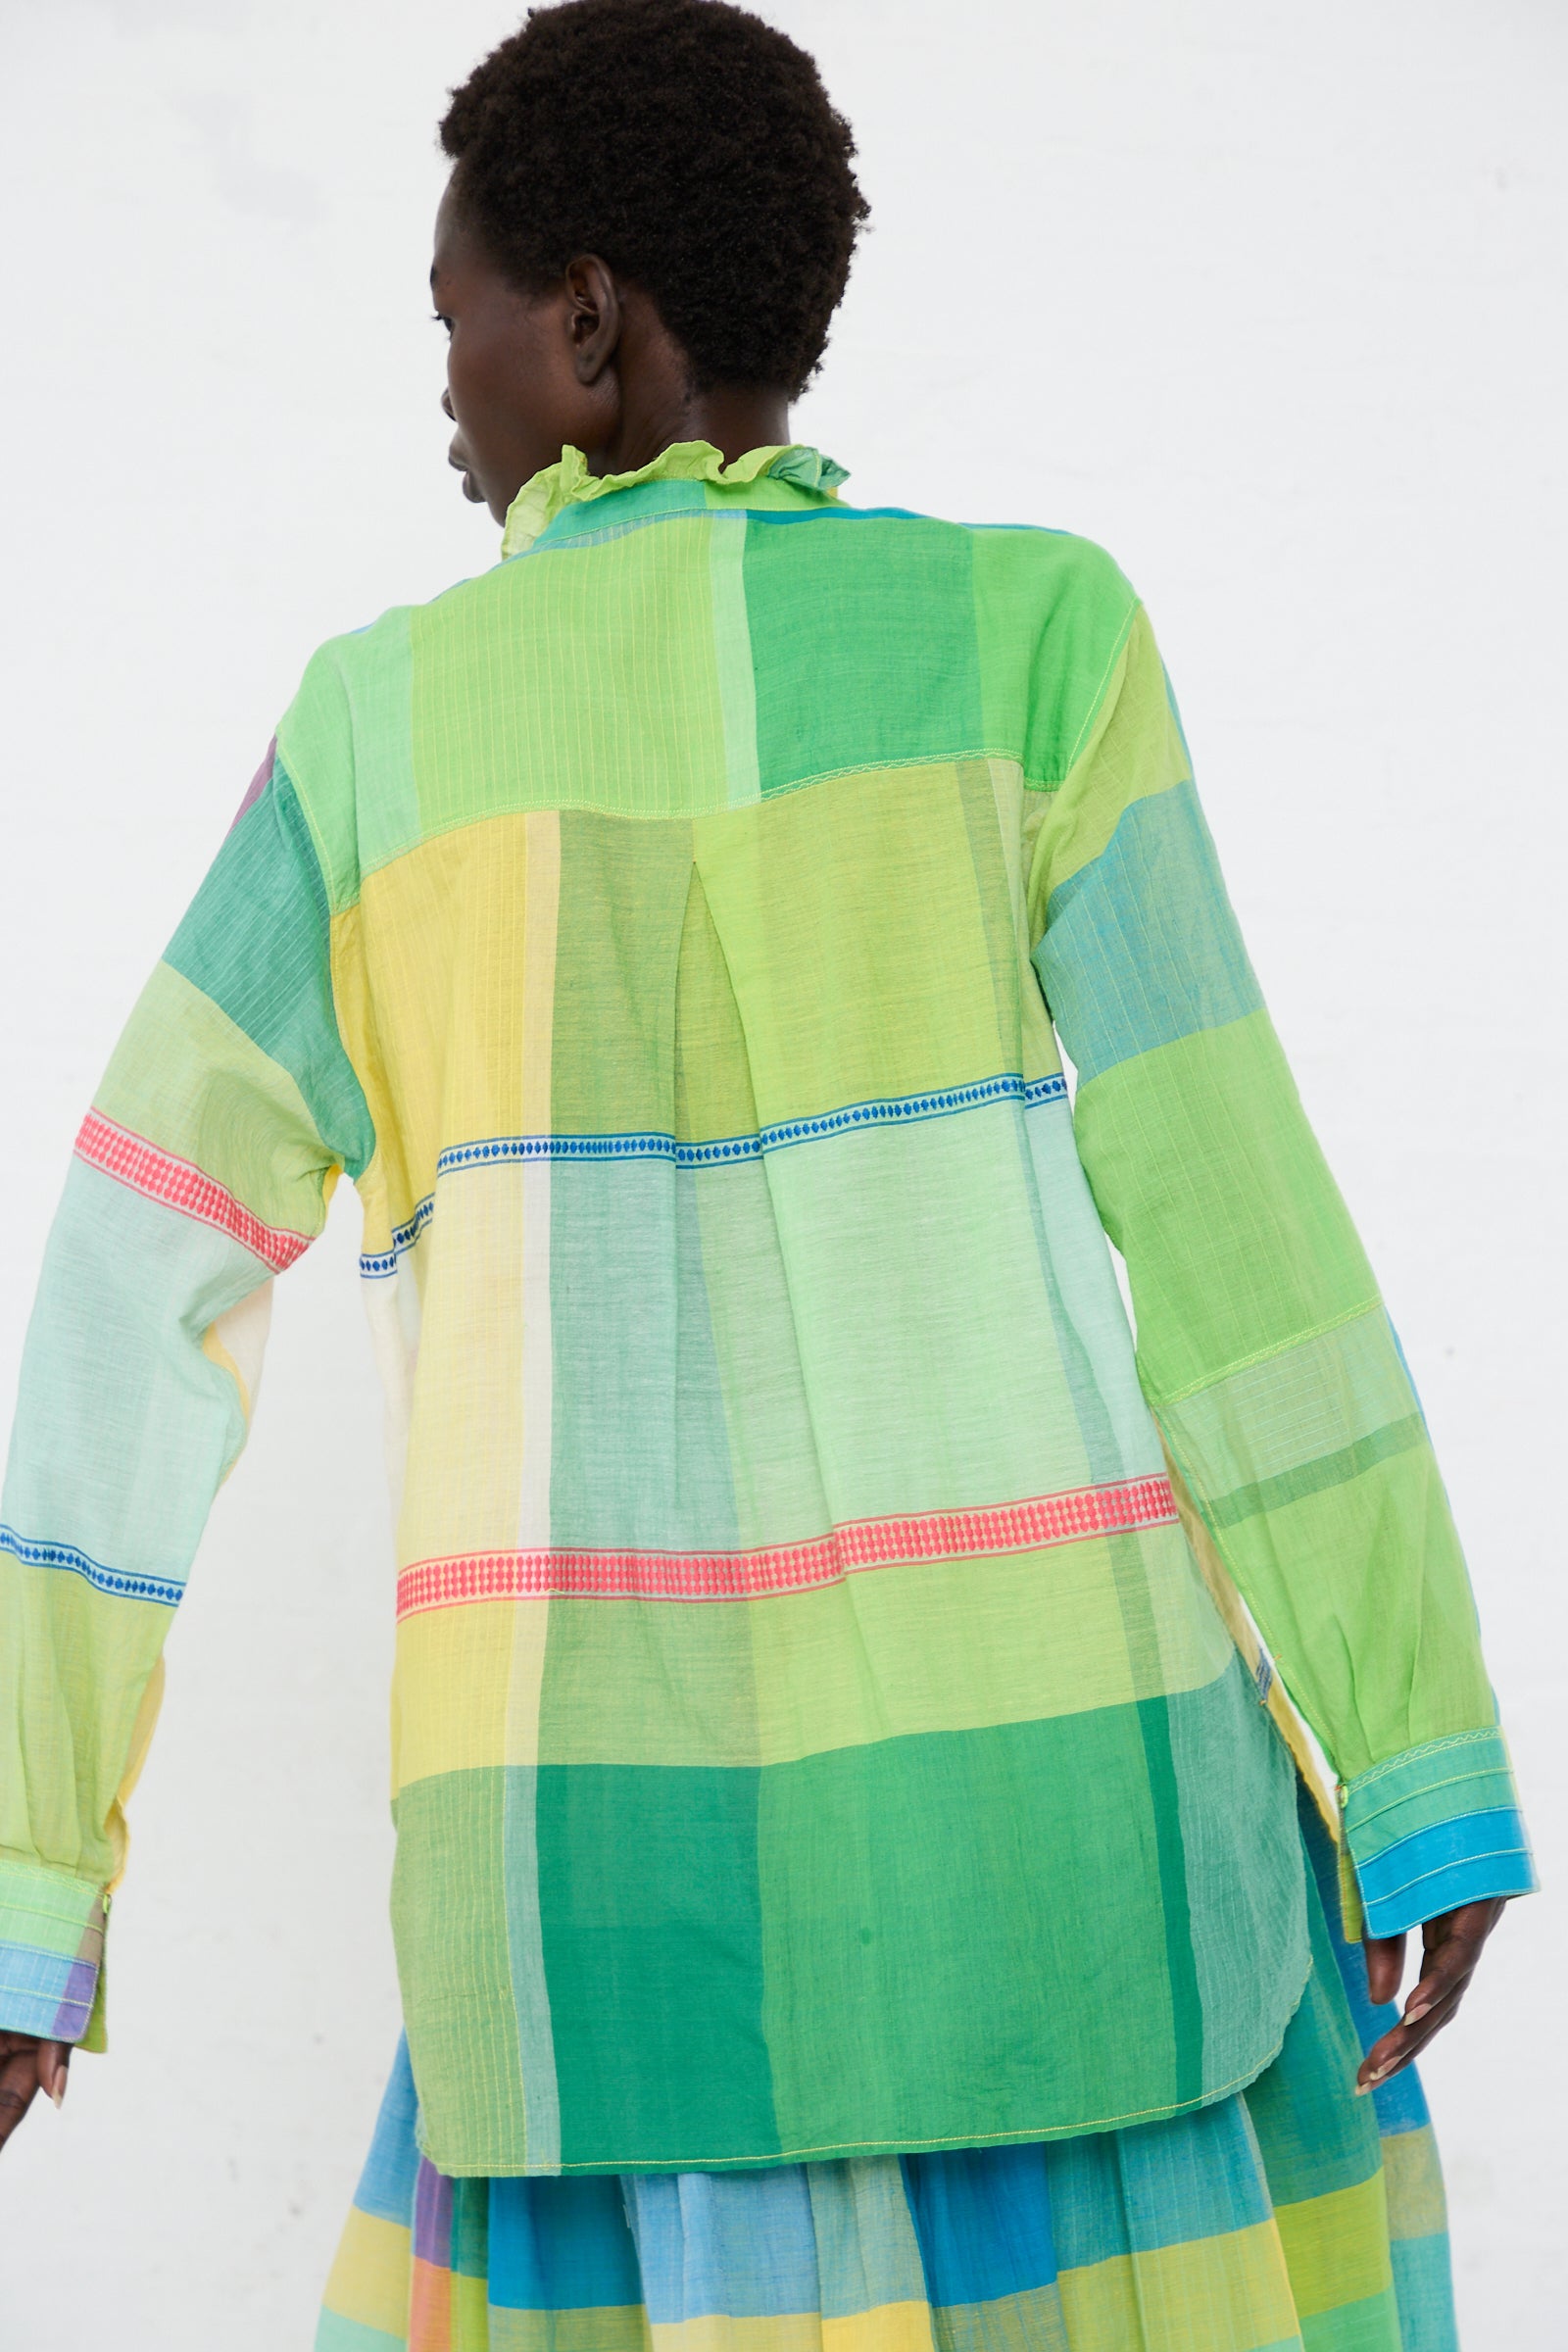 Rear view of a person wearing an Injiri Cotton Shirt in Green, Yellow and Pink Check against a plain white background.